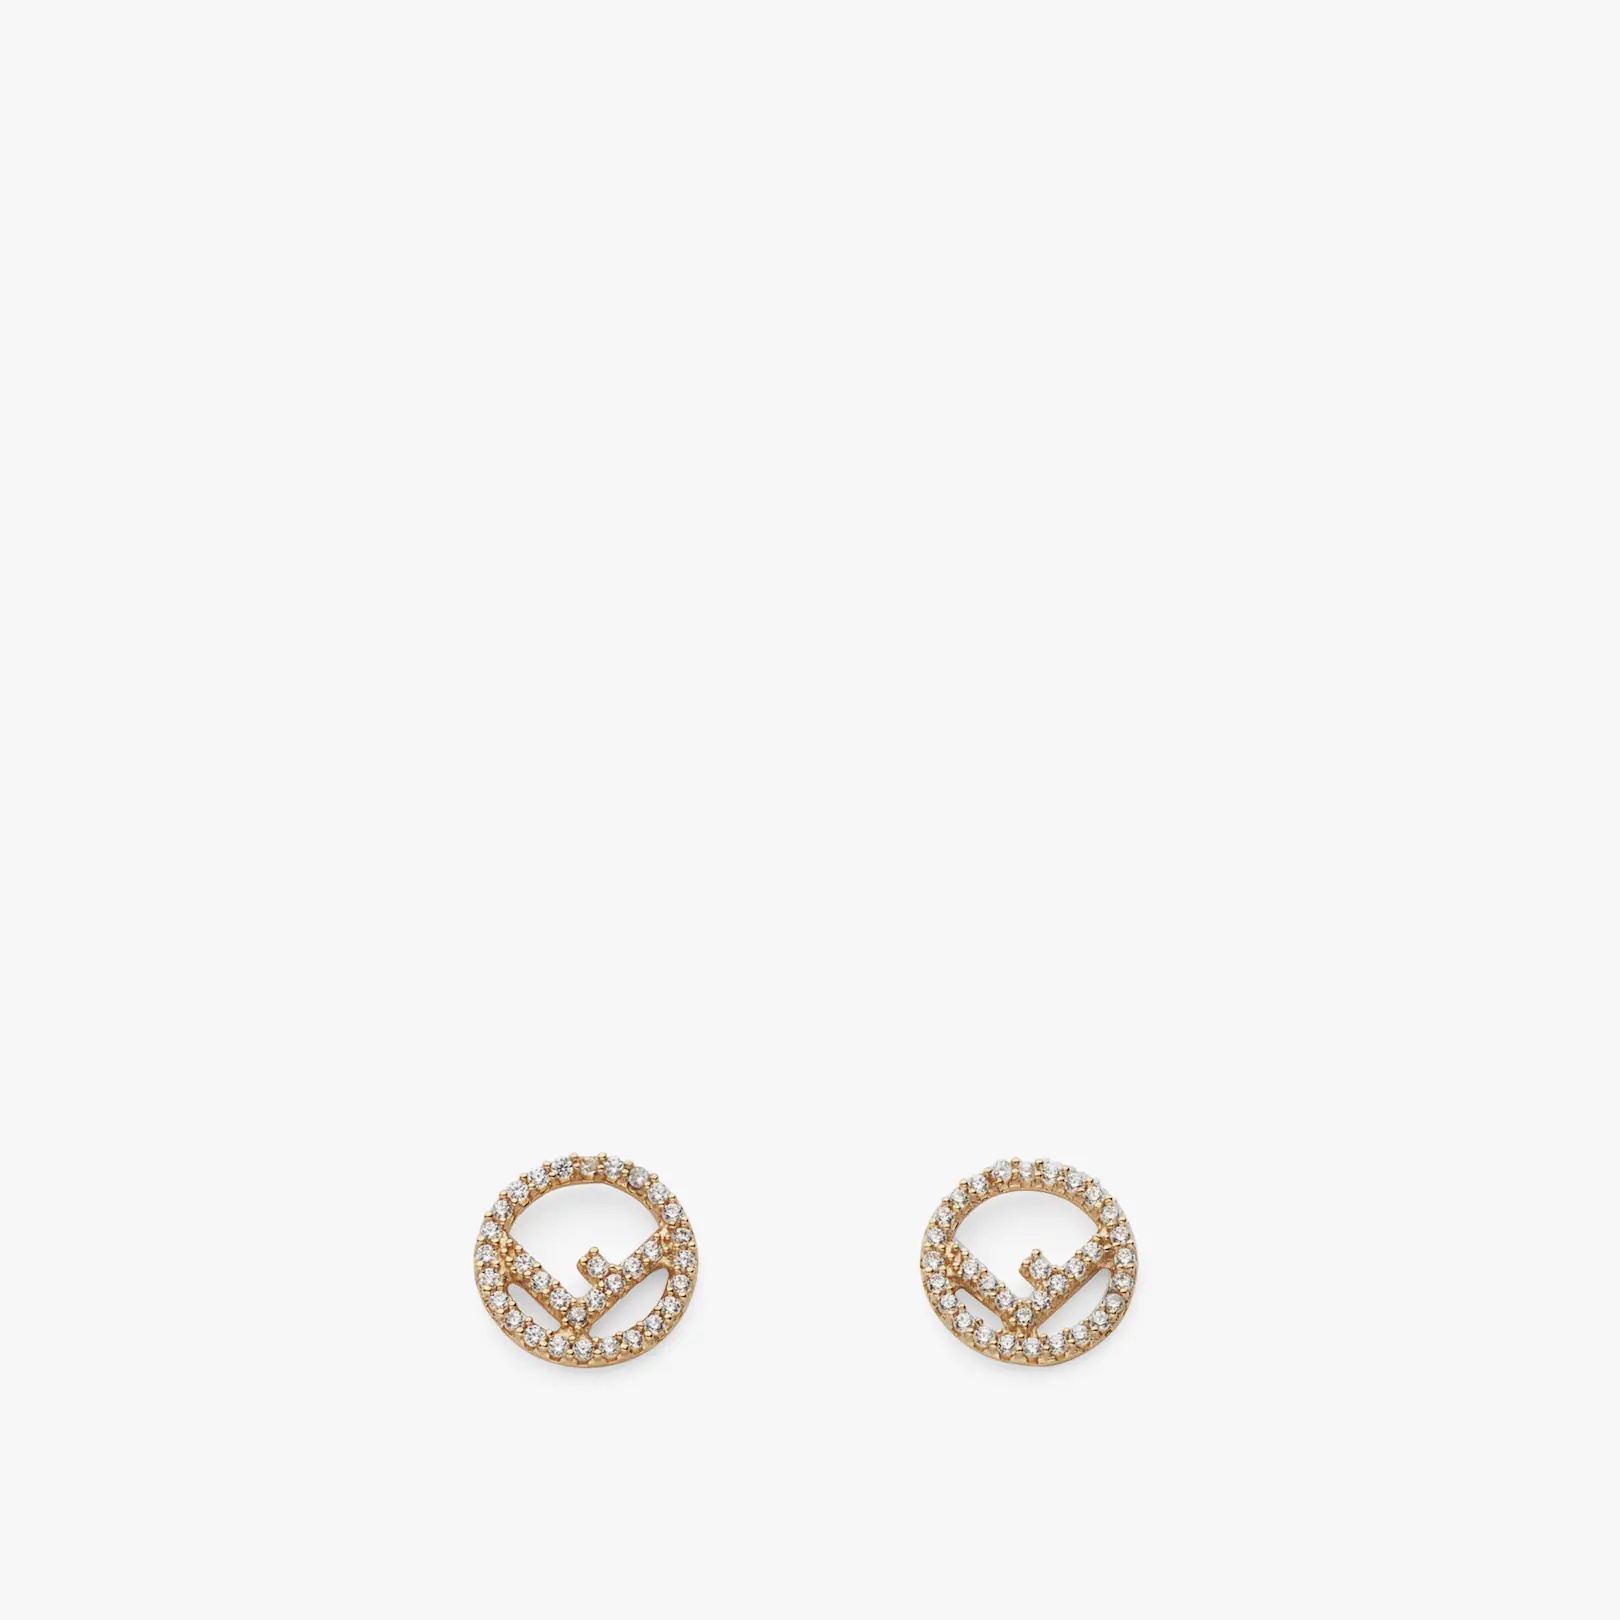 Gold-colored earrings - 1